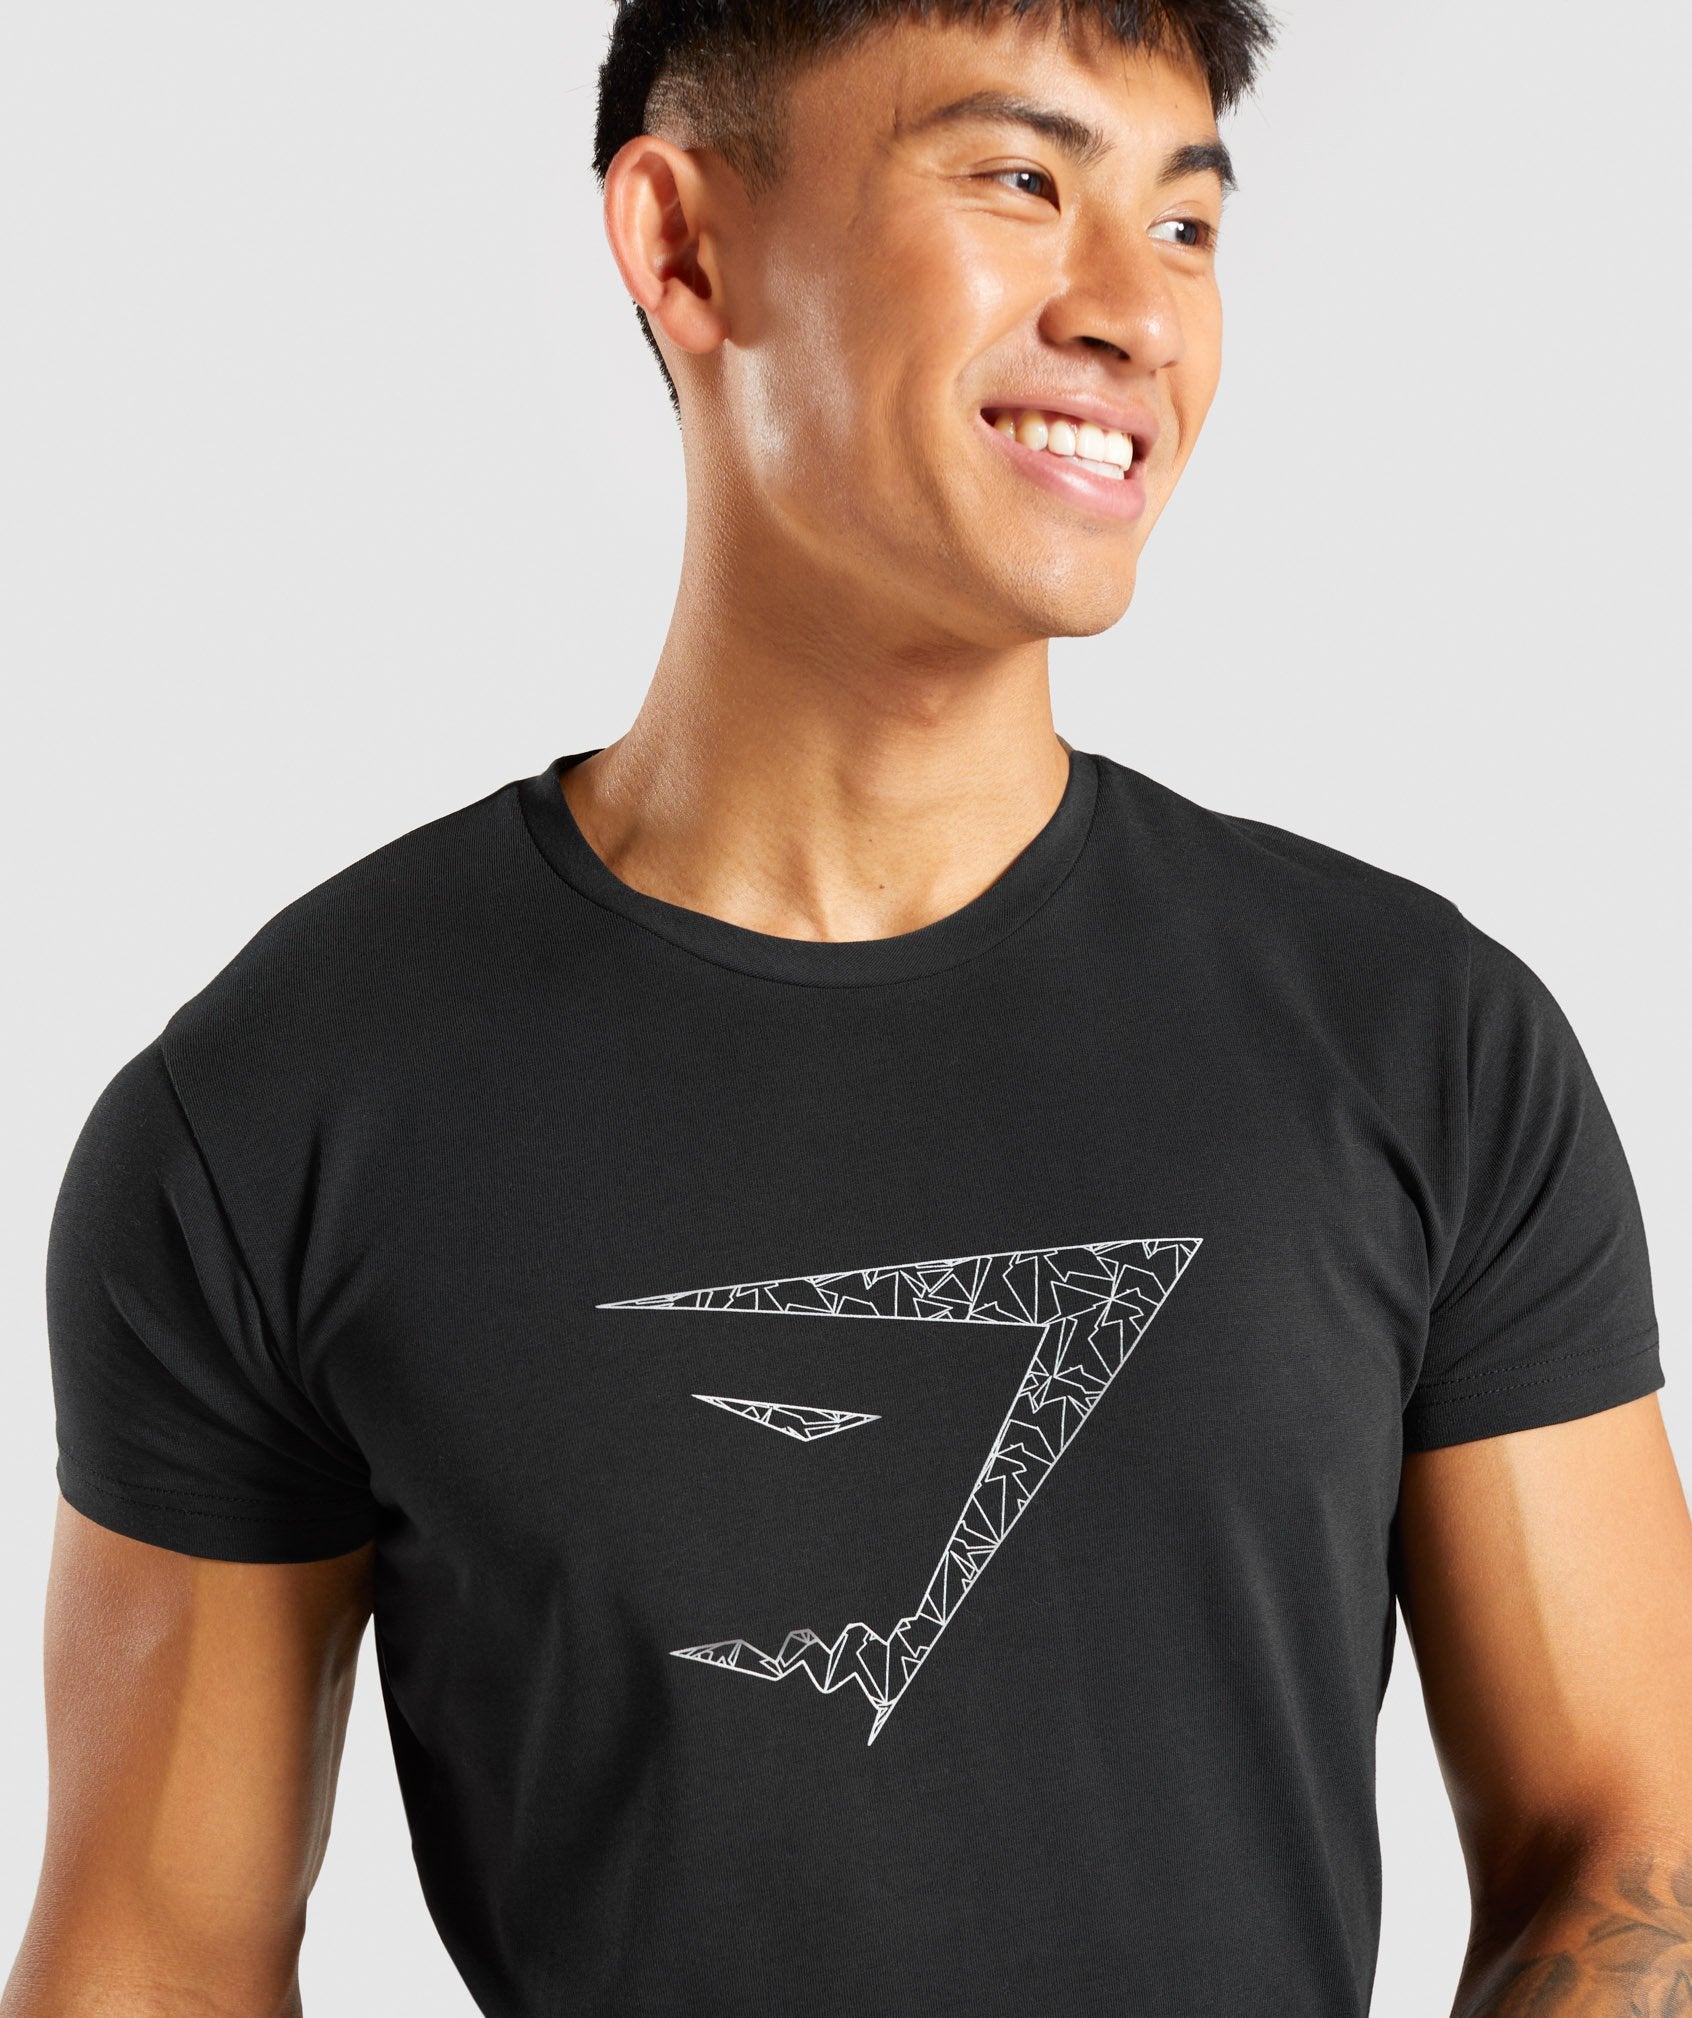 Infill T-Shirt in Black - view 6